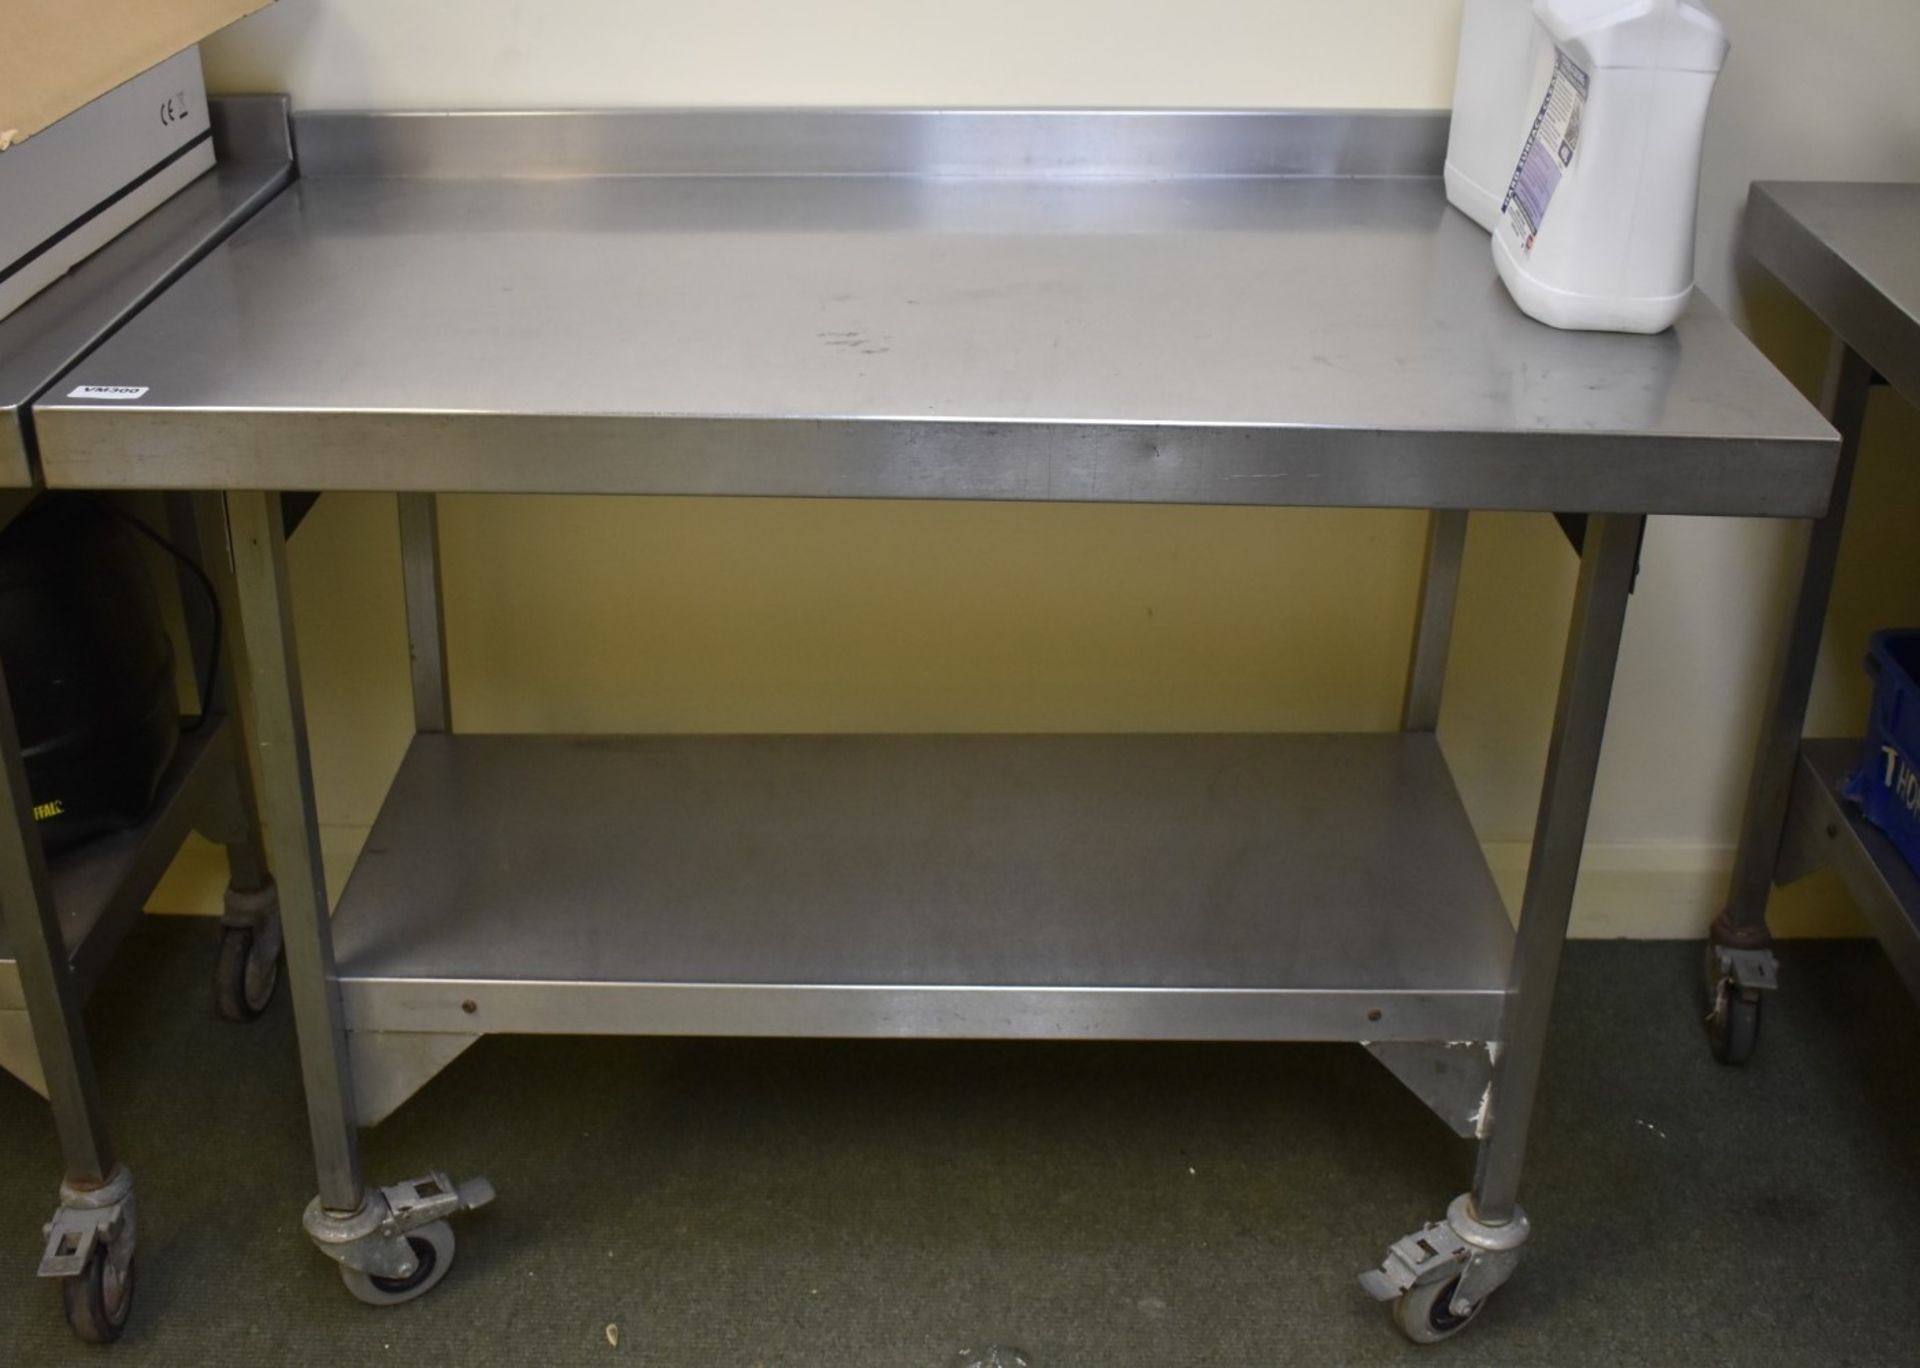 1 x Stainless Prep Bench With Undershelf and Castor Wheels - H87 x W120 x D65 cms - Ref VM300 B2 - - Image 2 of 2